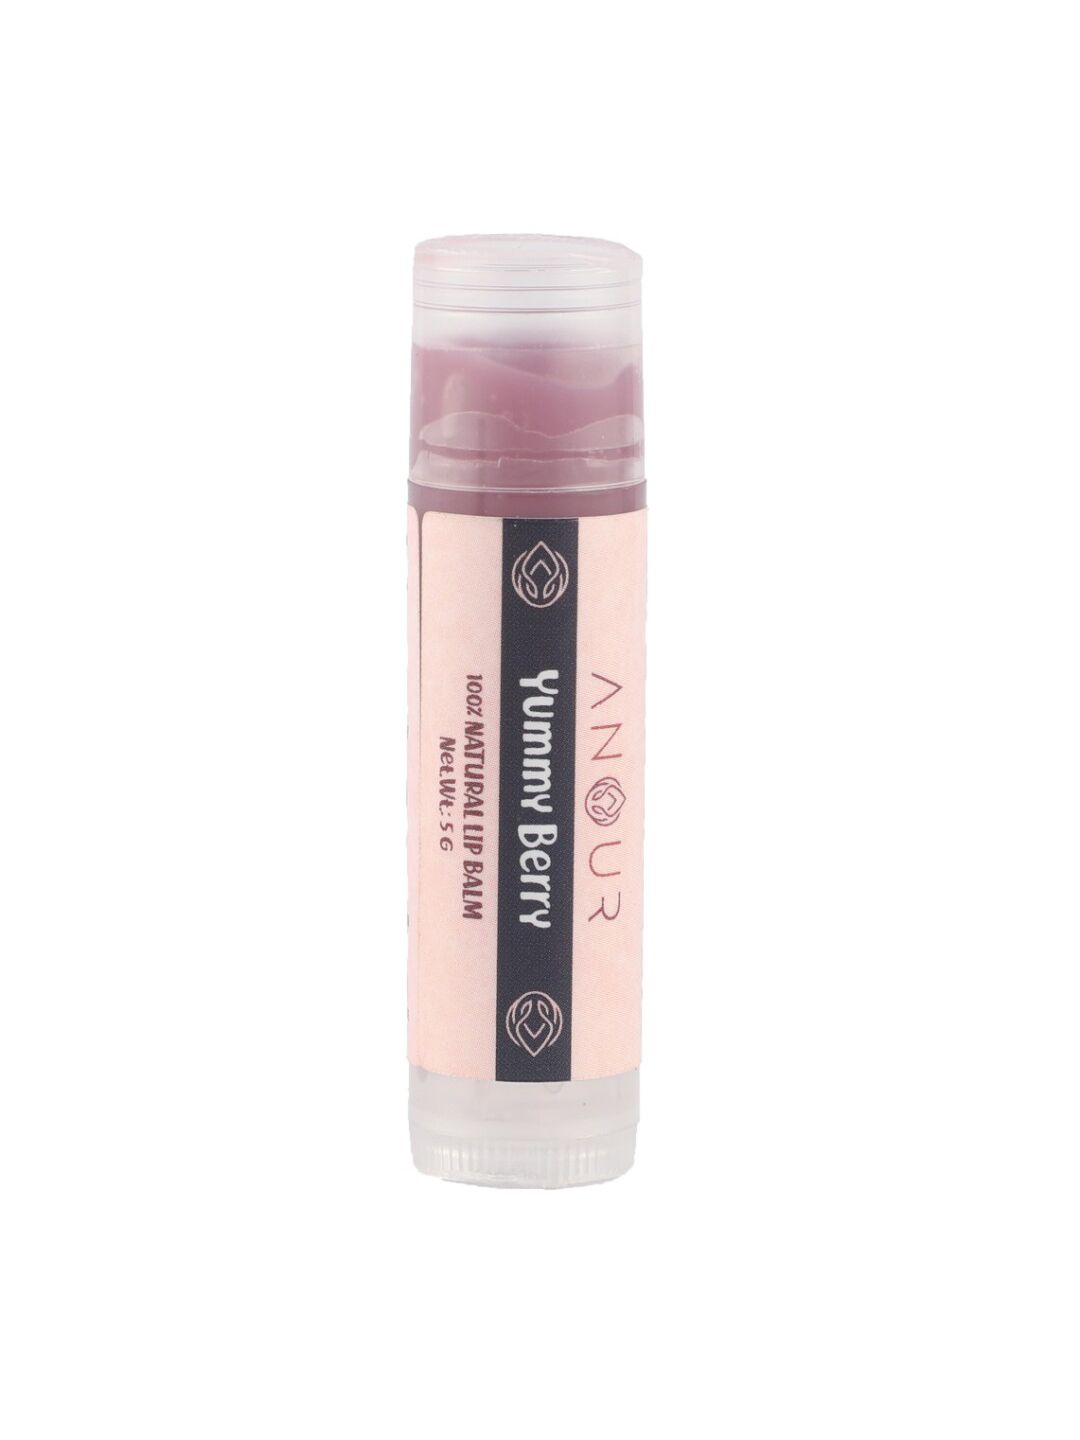 Anour Yummy Berry 100% Natural Lip Balm - 5 Ggm Price in India